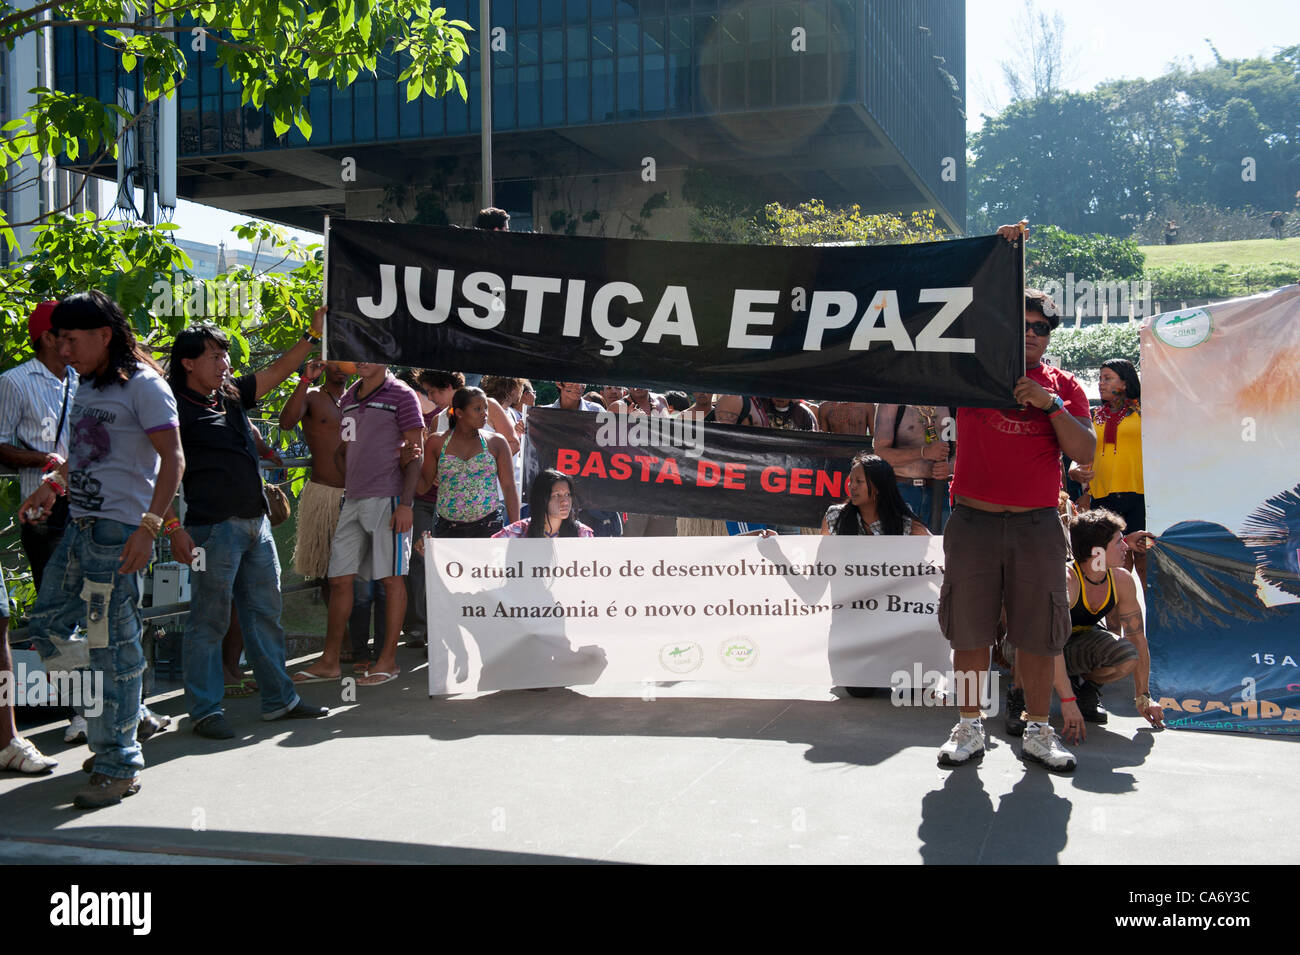 Indigenous people with a banner, 'Justice and Peace', protest outside BNDES, the Brazilian Development Bank, after marching from the People's Summit at the United Nations Conference on Sustainable Development (Rio+20), Rio de Janeiro, Brazil, 18th June 2012. Photo © Sue Cunningham. Stock Photo